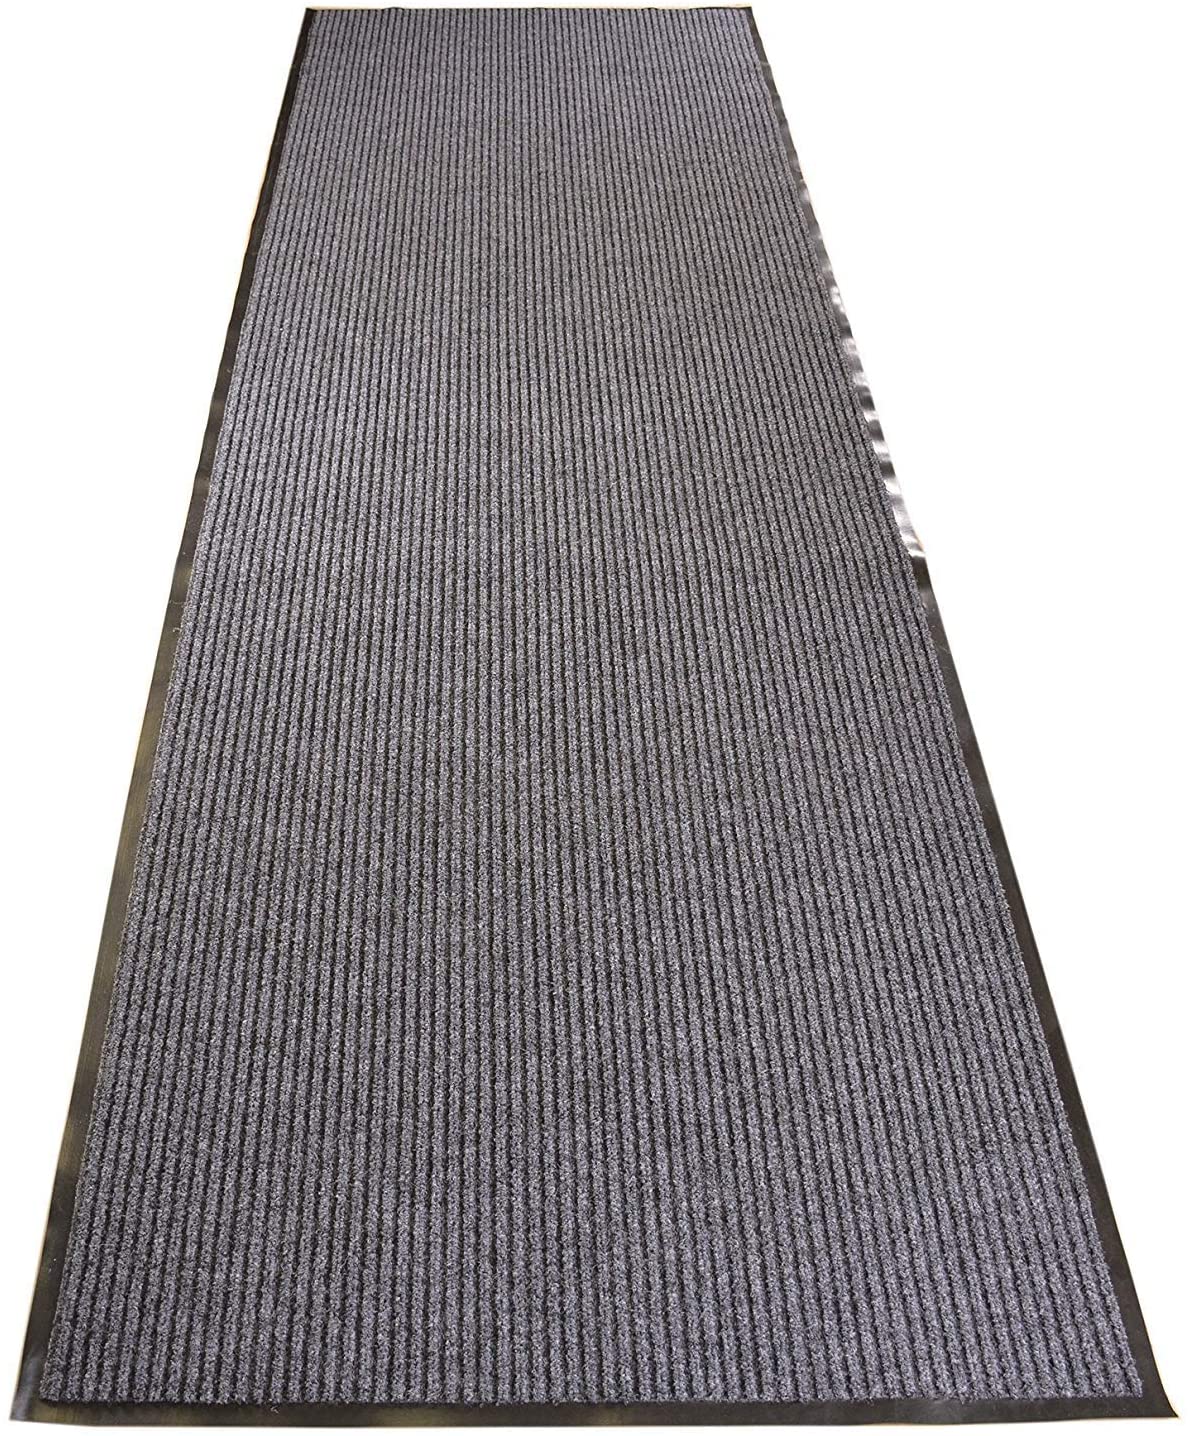 Entry Mat With Ridges Extended Rubber Edges Slip Skid Resistant PVC Backing Commercial Grade (Grey, 3' x 8')